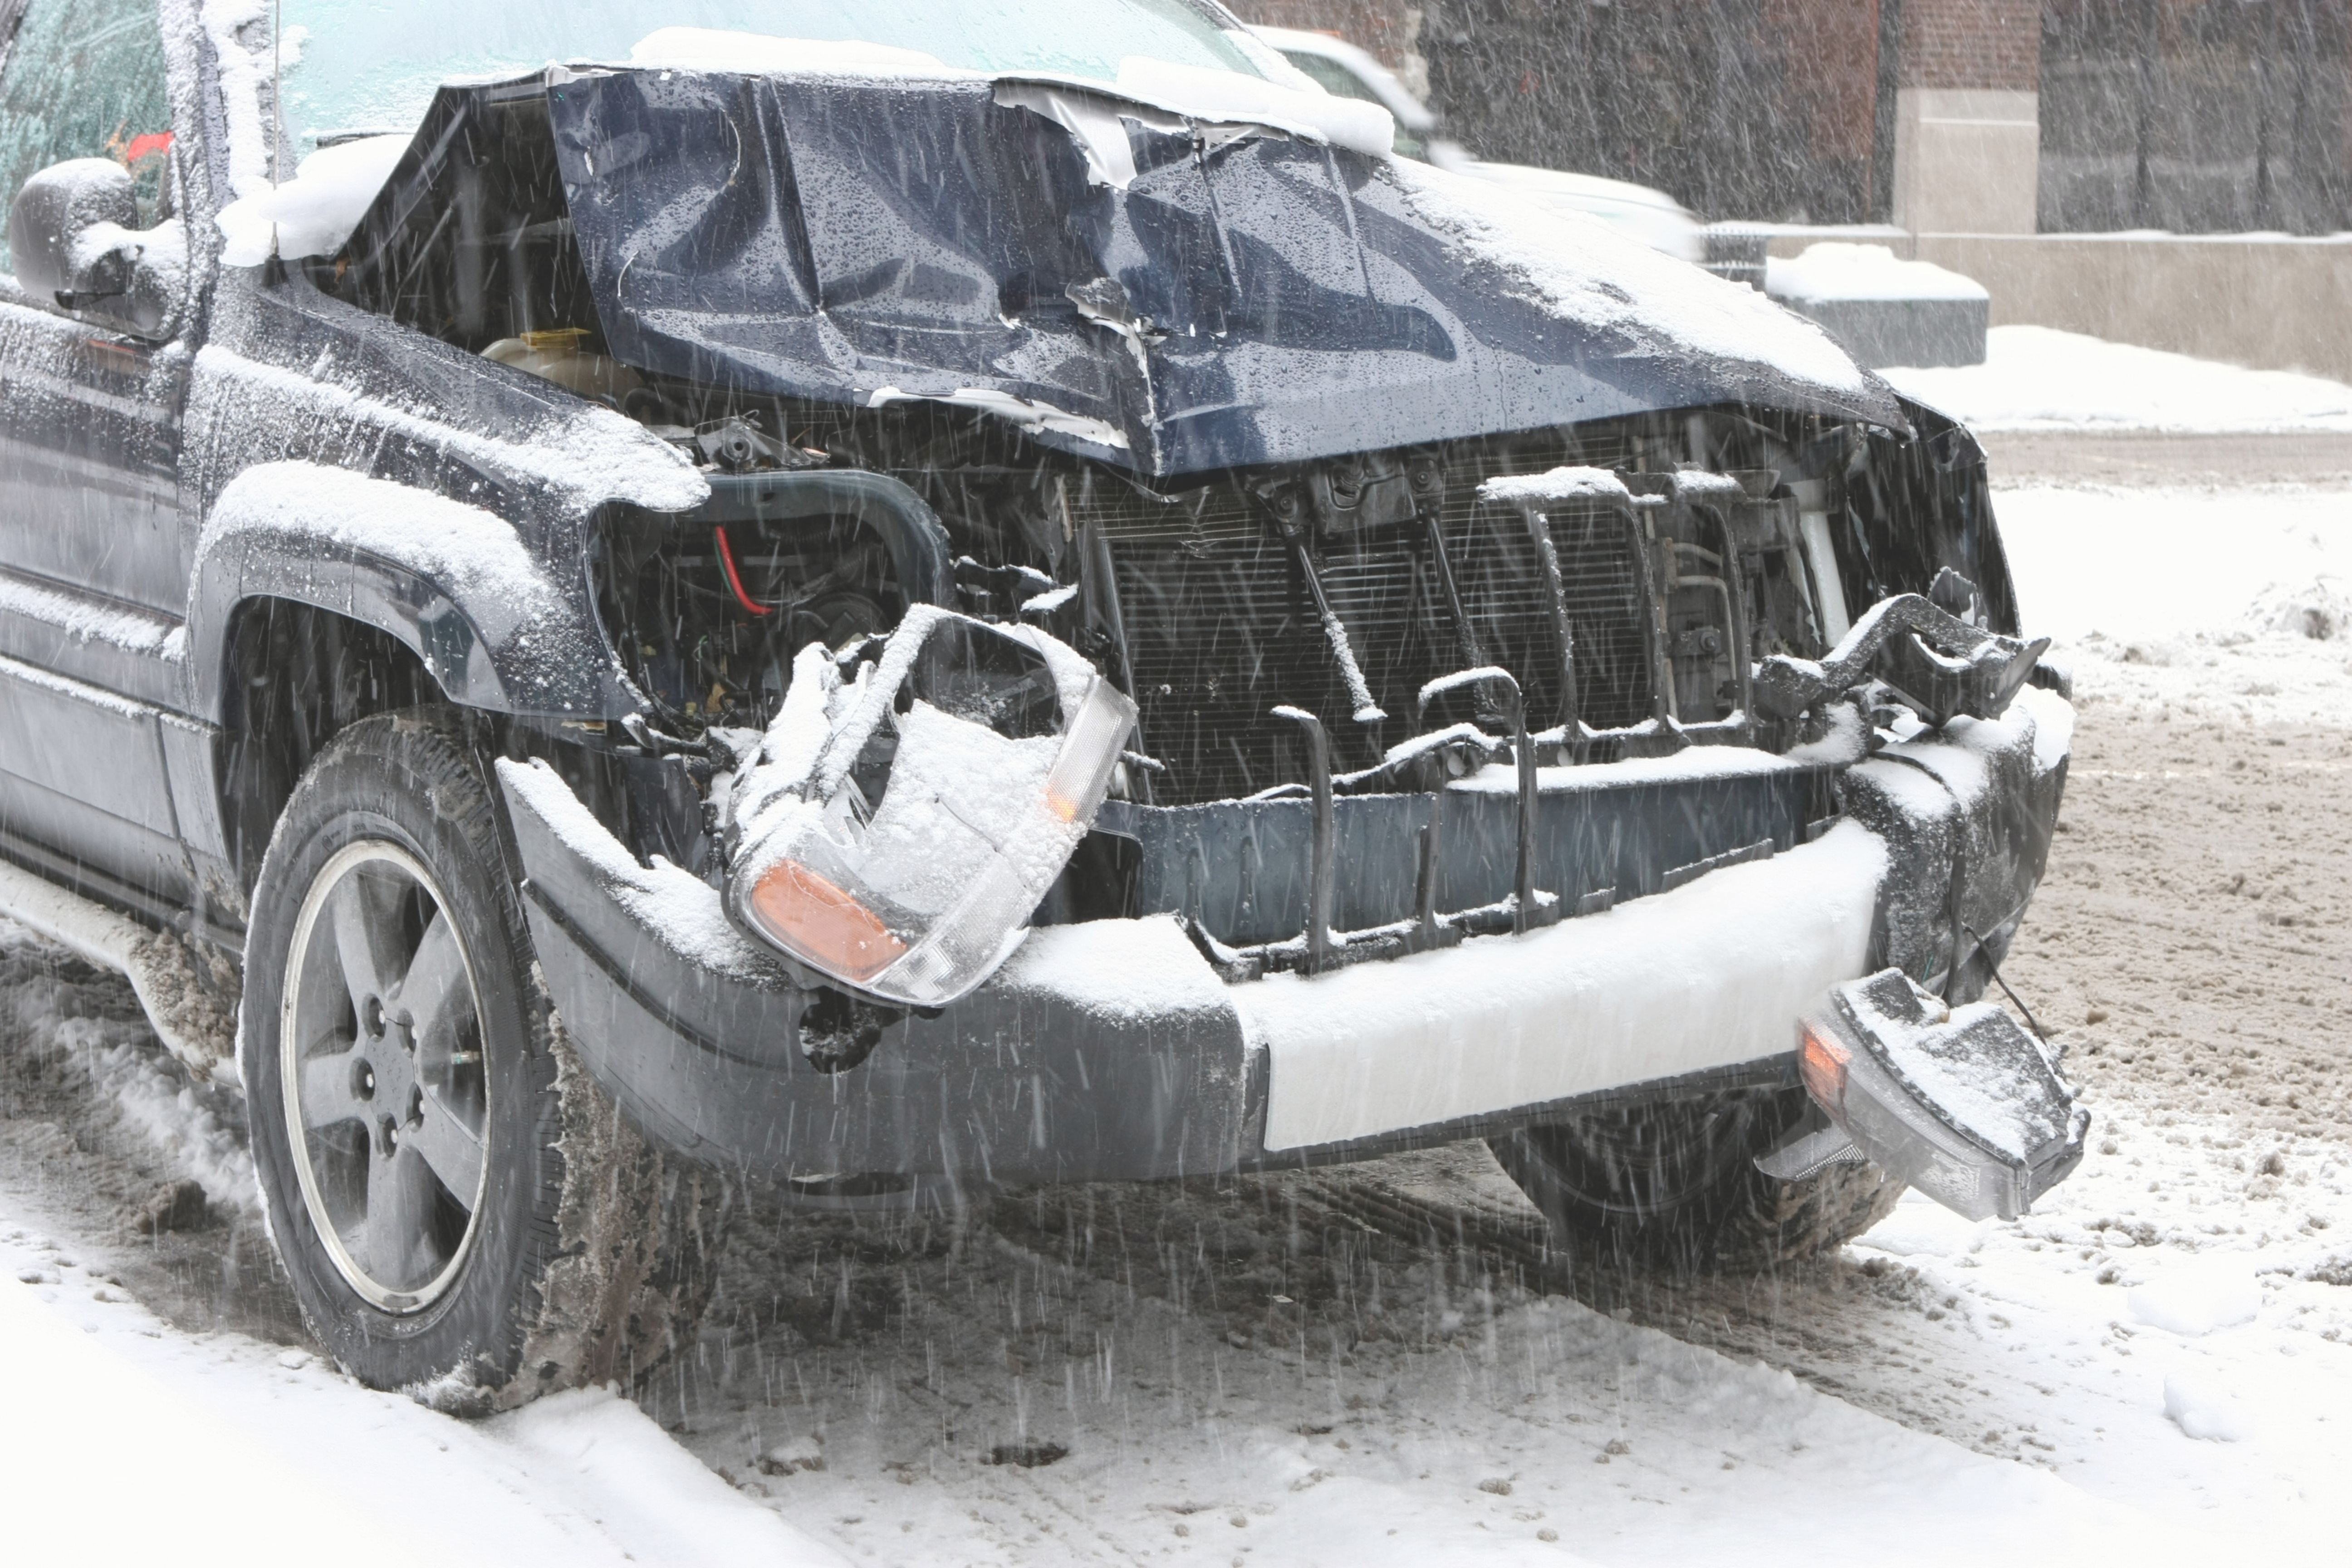 5 ways to stay safe after a winter car accident